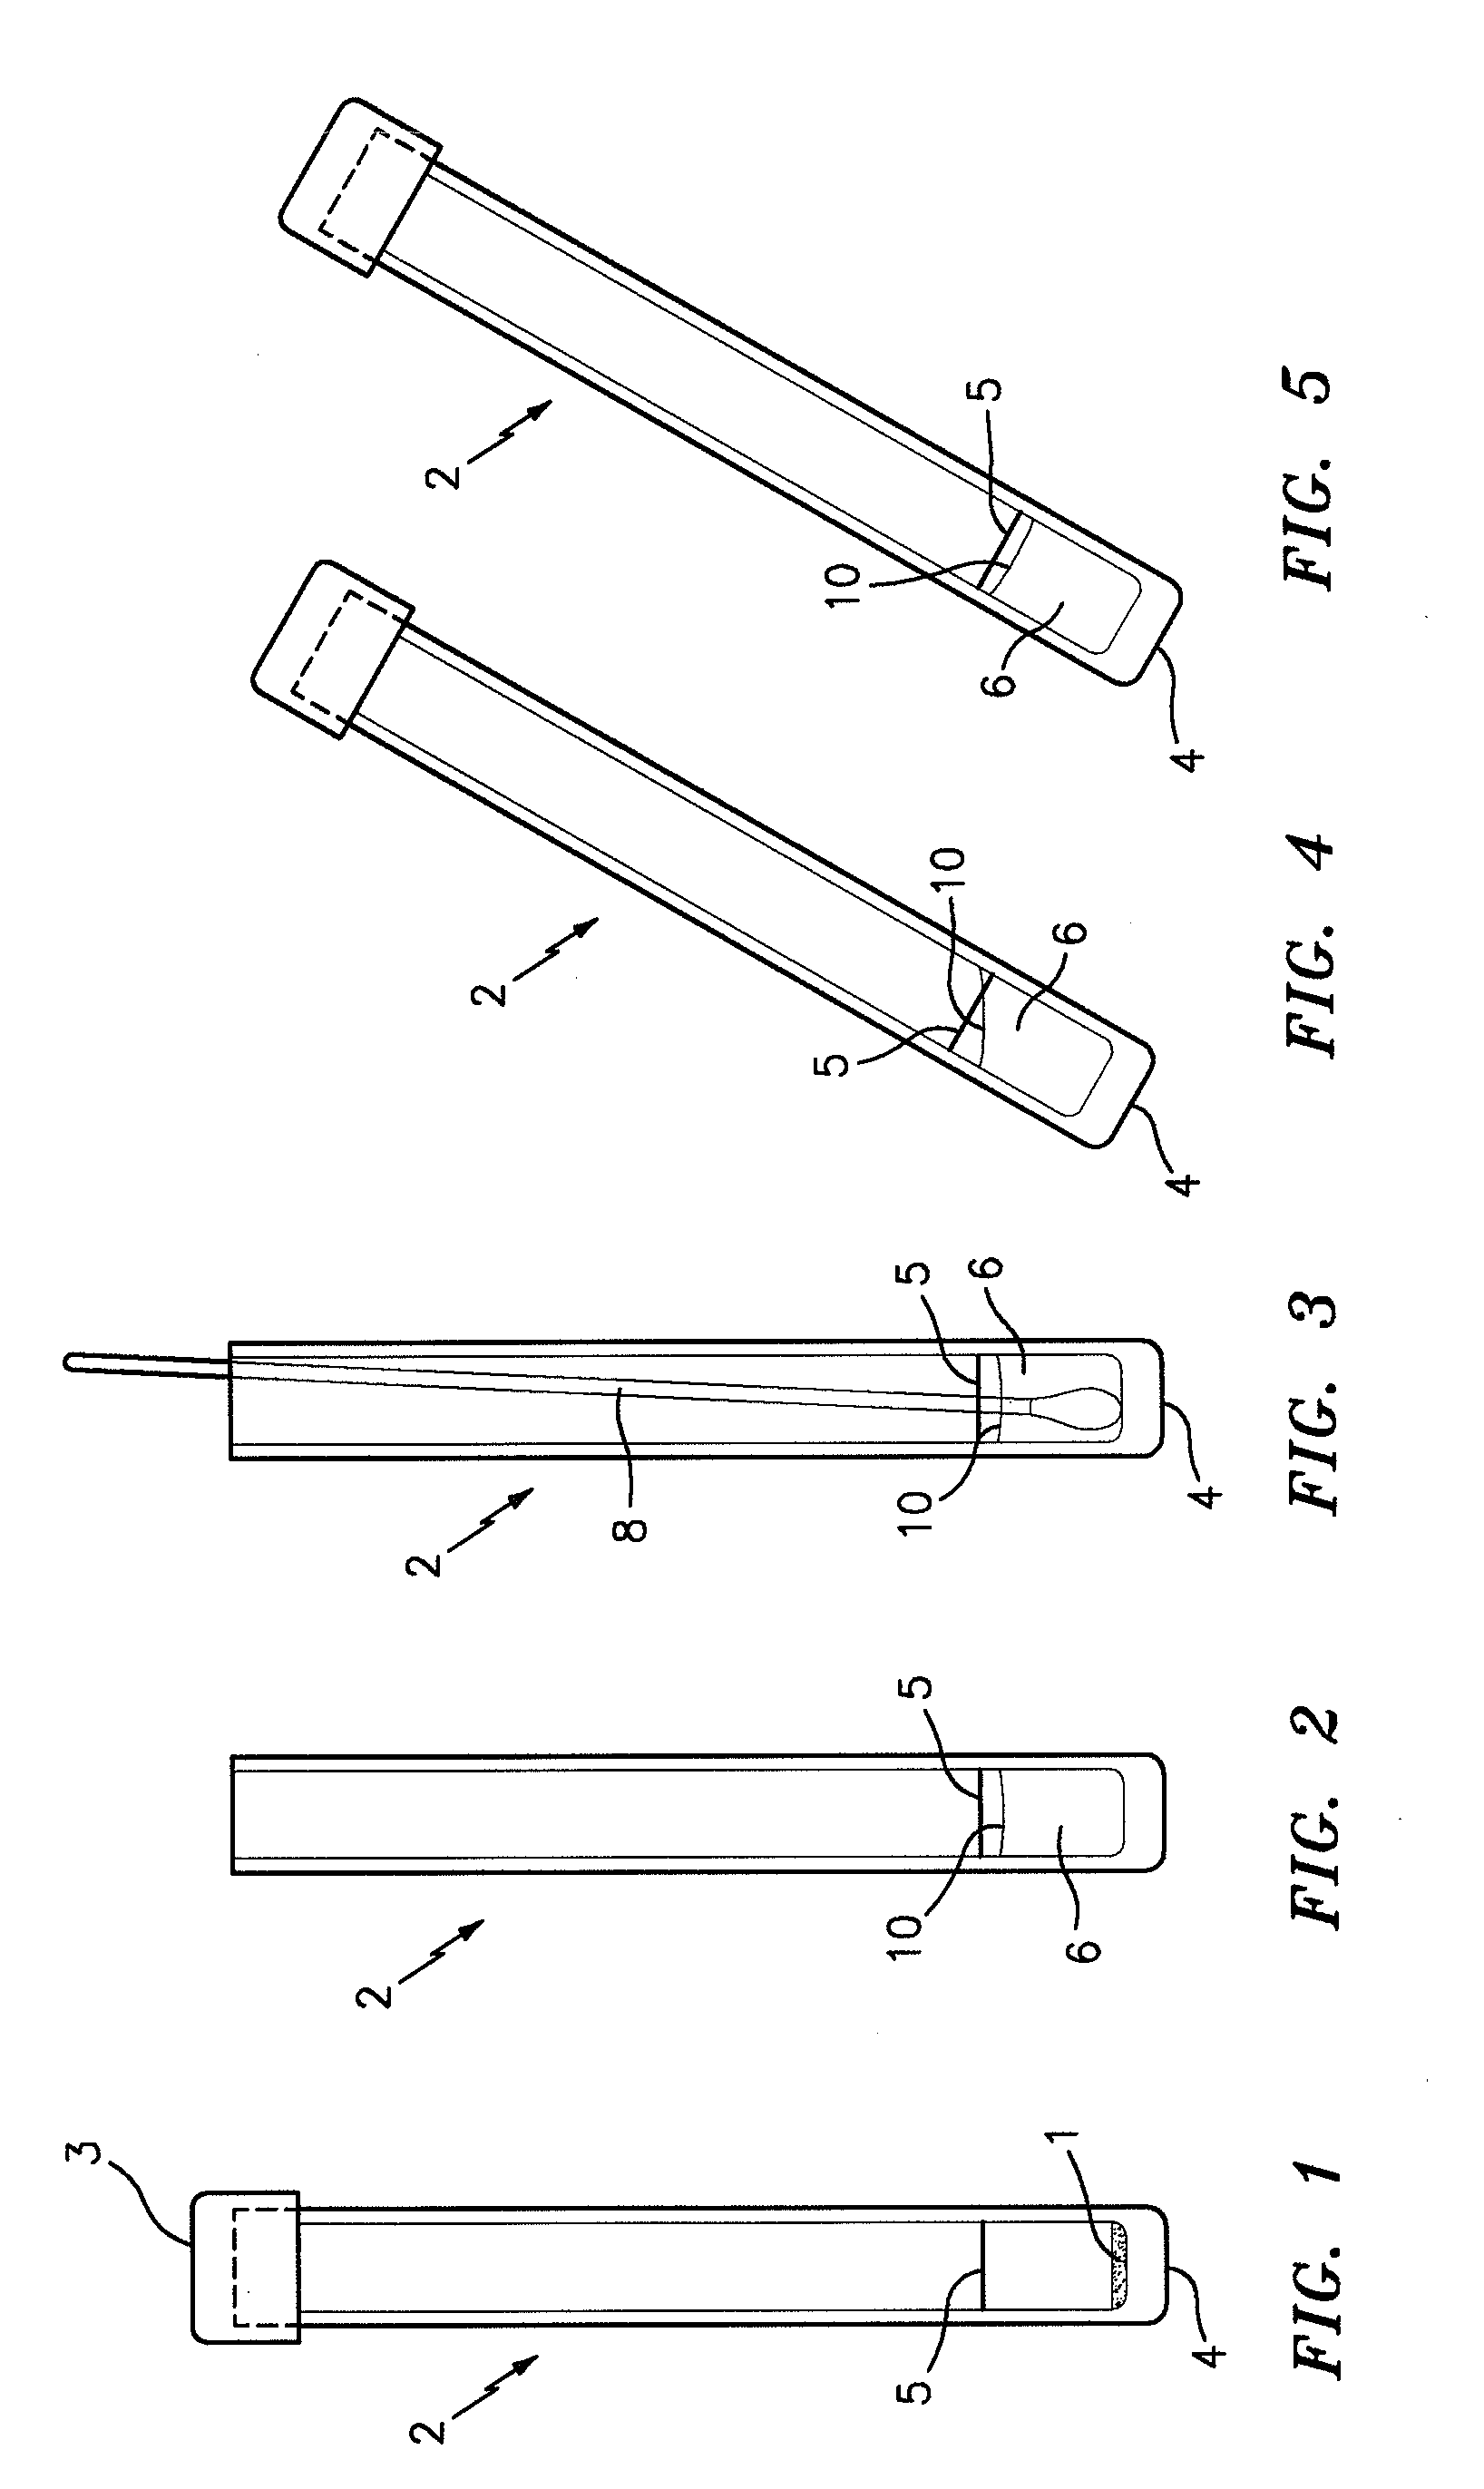 Method and medium for detecting the presence or absence of pathogenic staphylococci in a first generation test sample